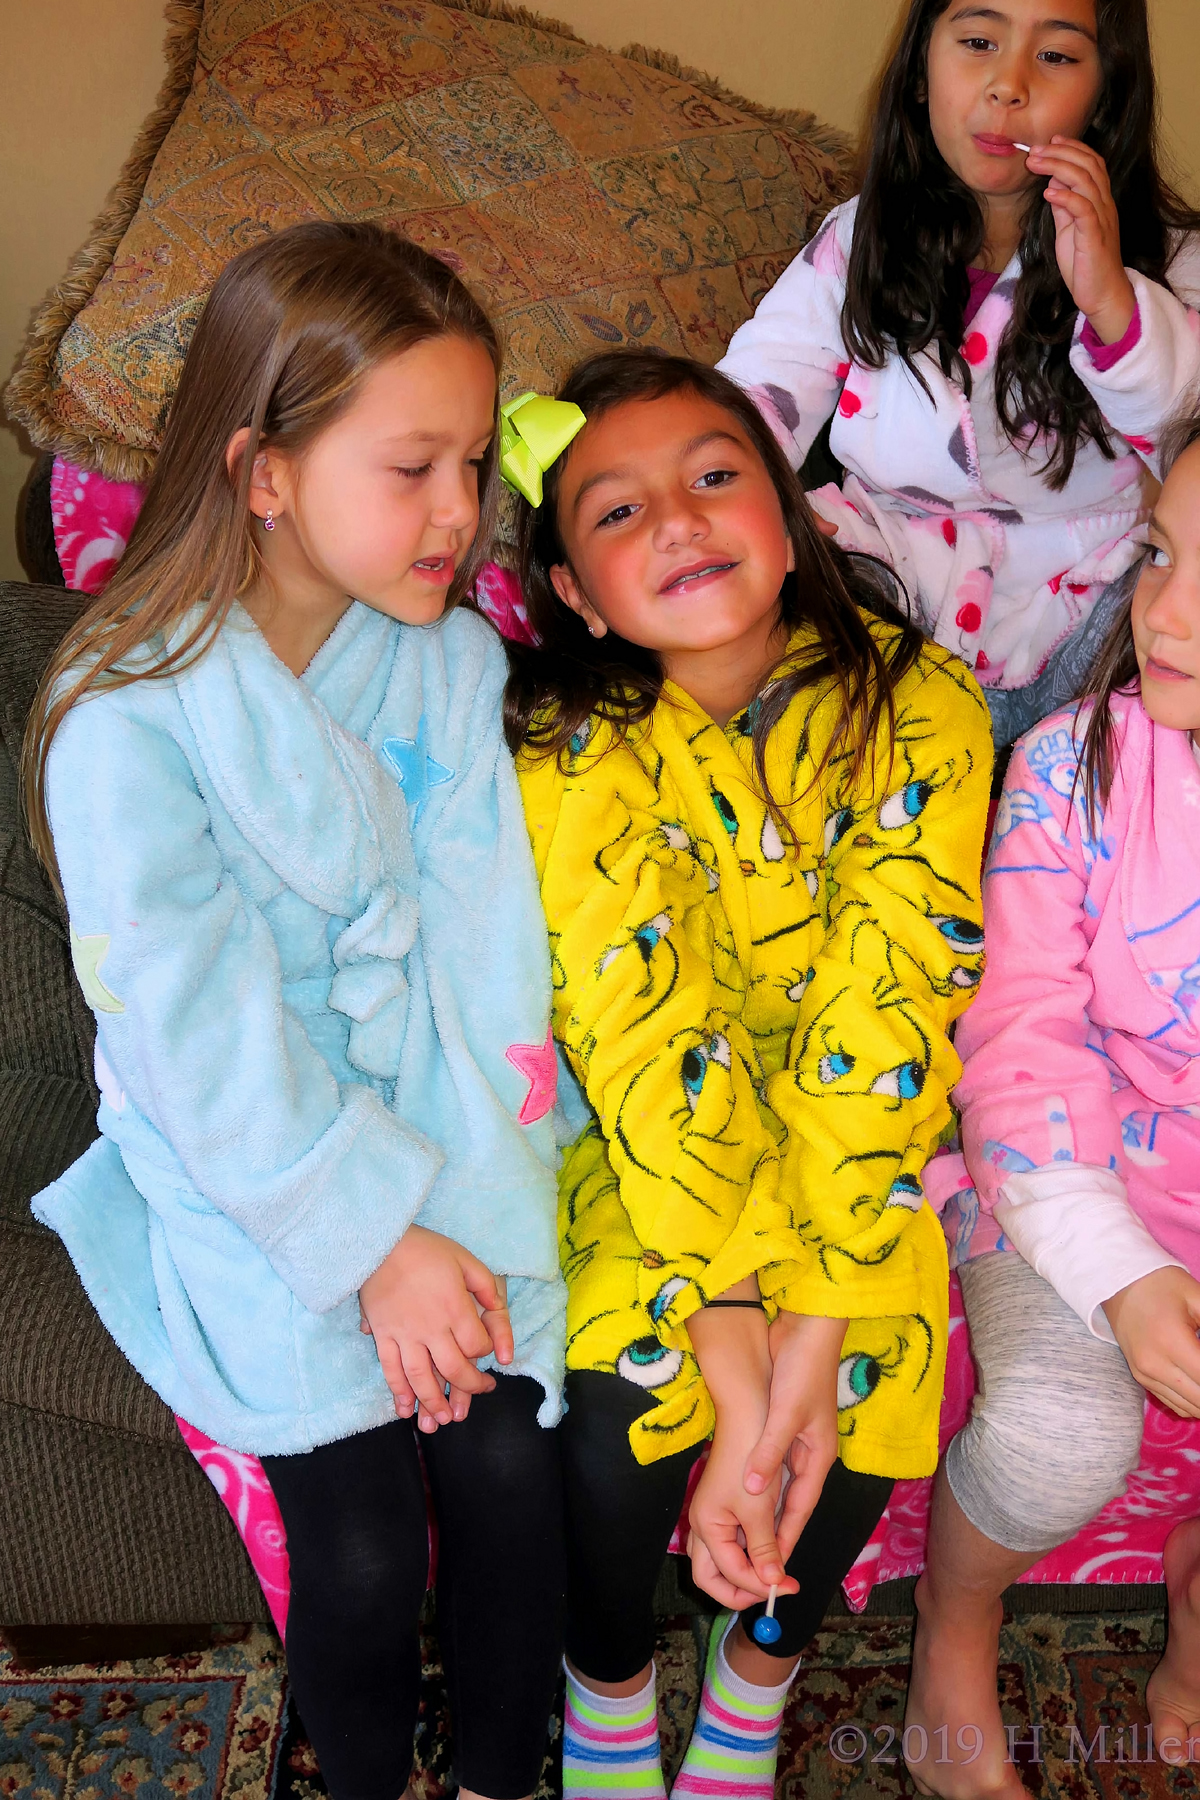 Chilling Out In Comfort! Party Guests Relax In Kids Spa Robes! 